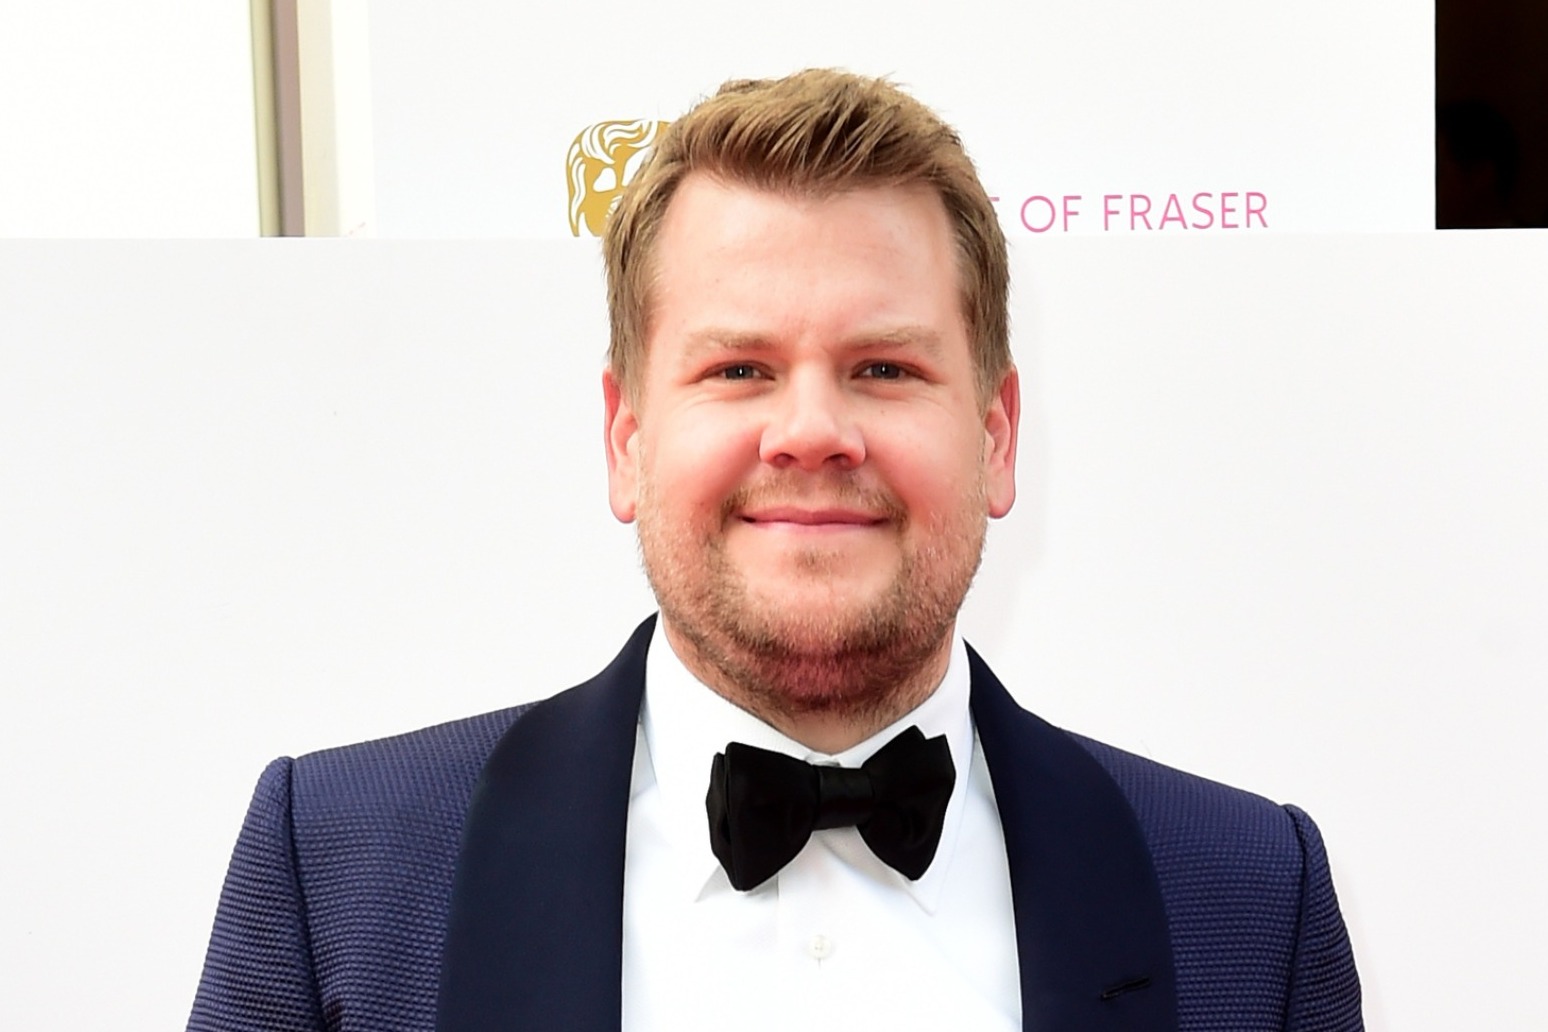 James Corden filled with ‘pride’ as he signs off The Late Late Show 